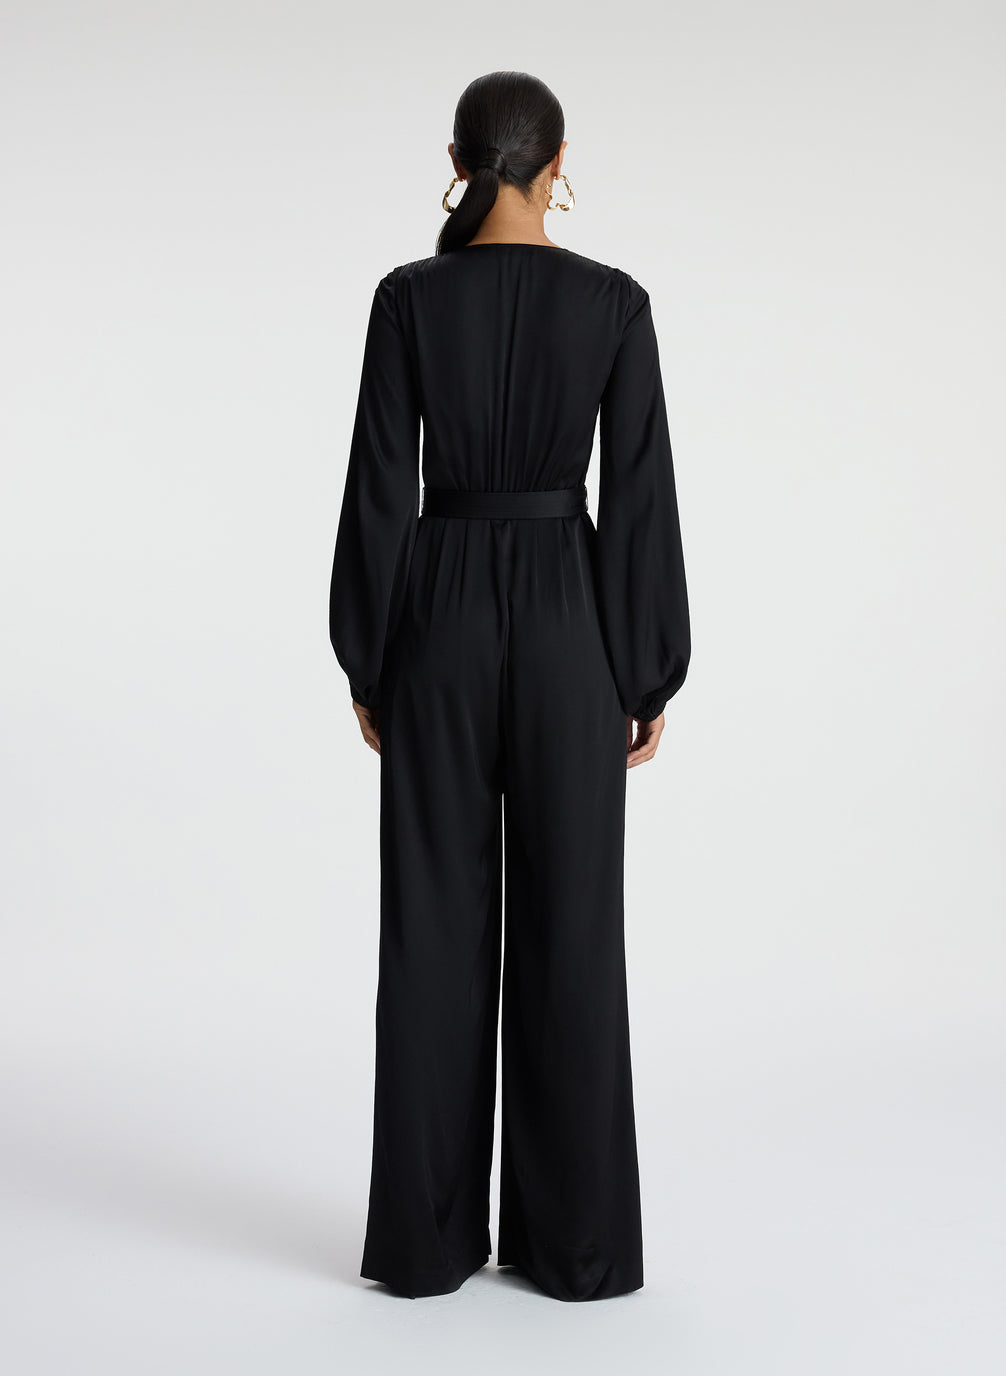 back view of woman wearing black satin long sleeve jumpsuit